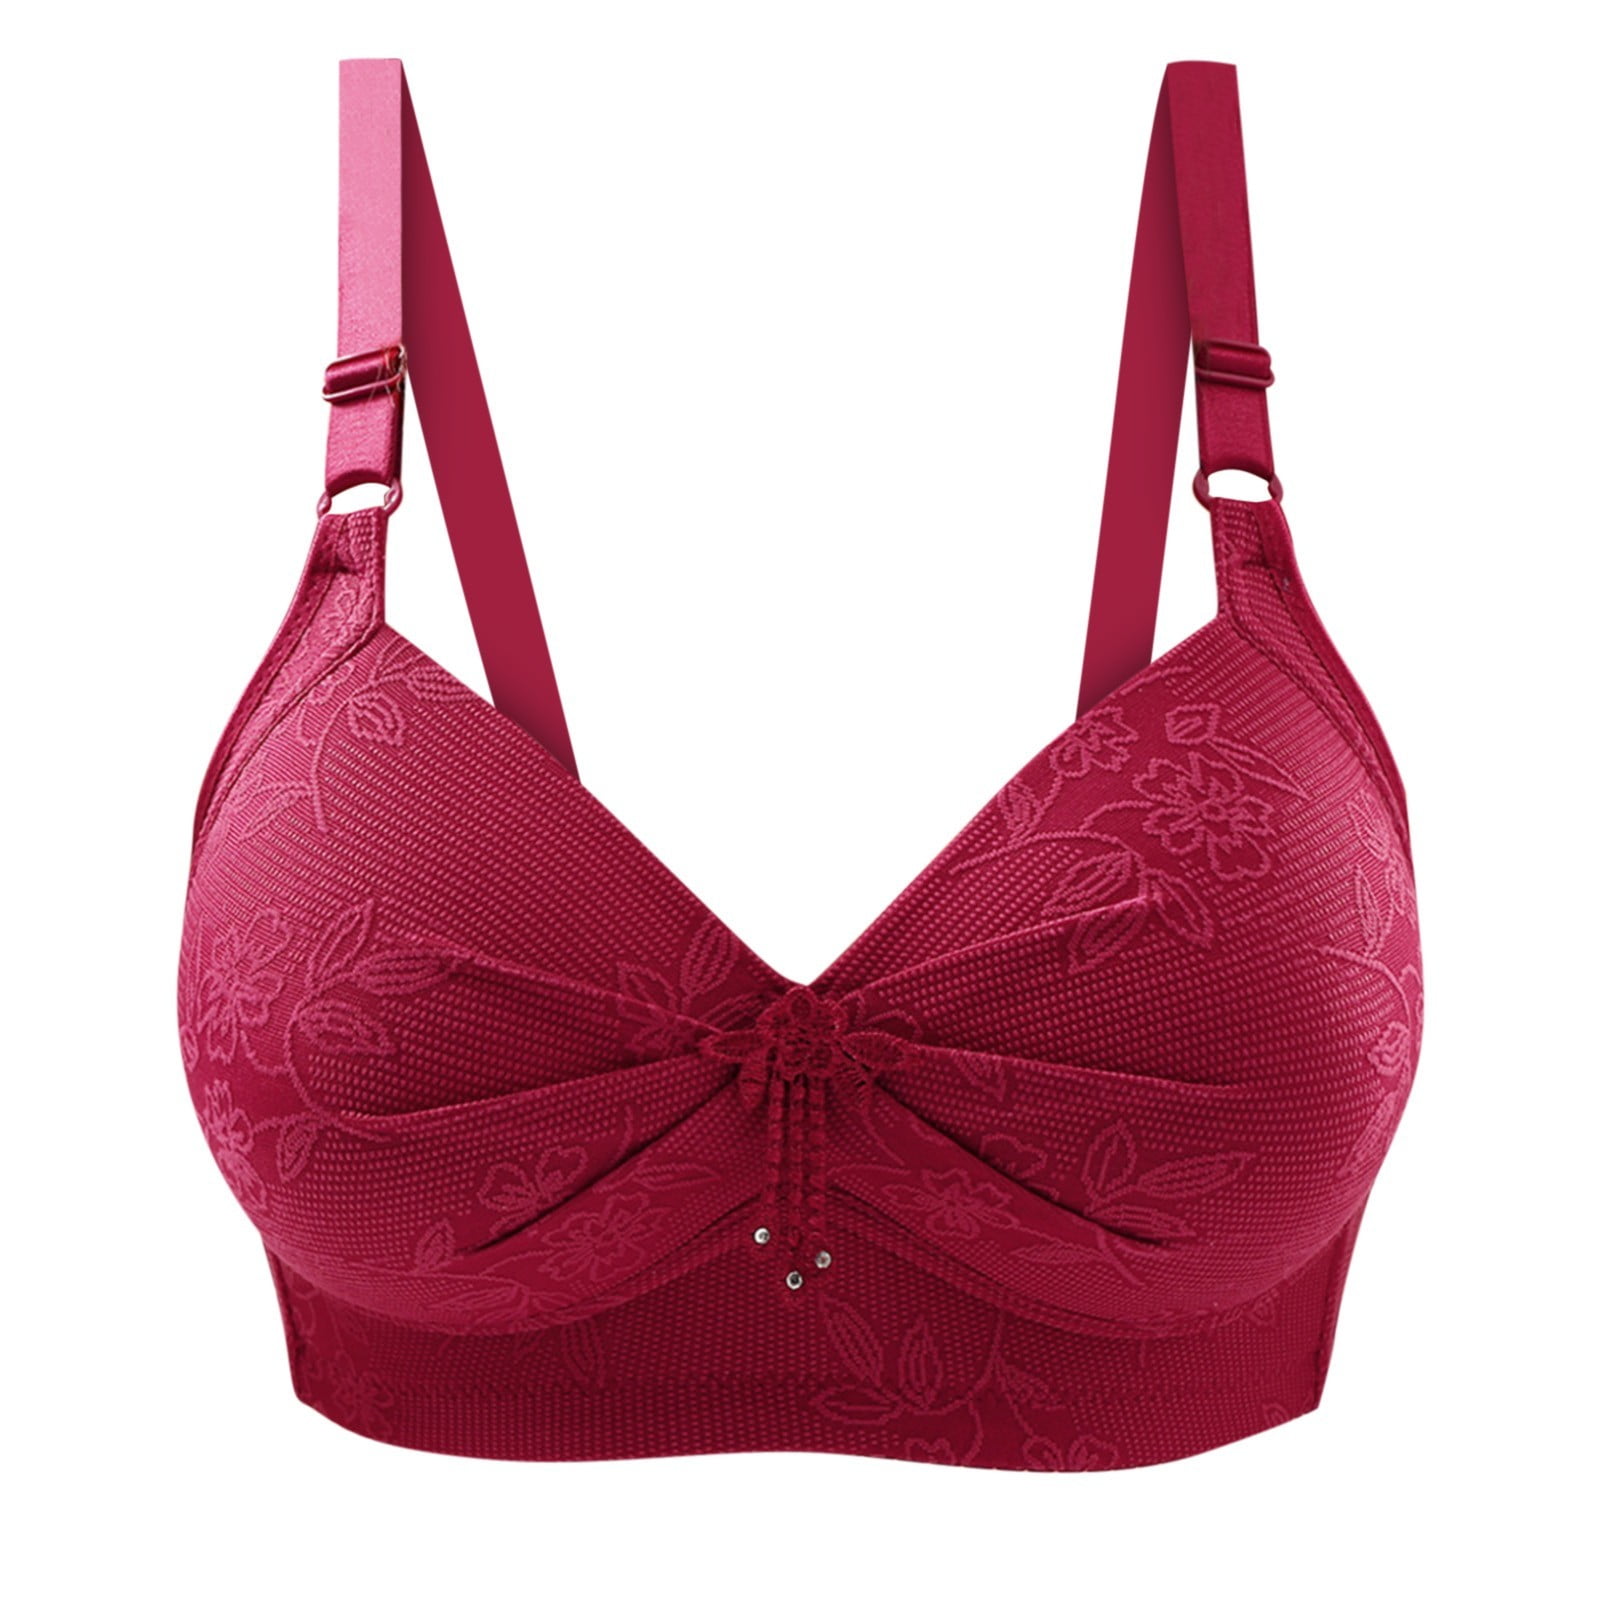 Mother's Day Gifts Tawop Women Bras 12-14 Years Old Woman'S